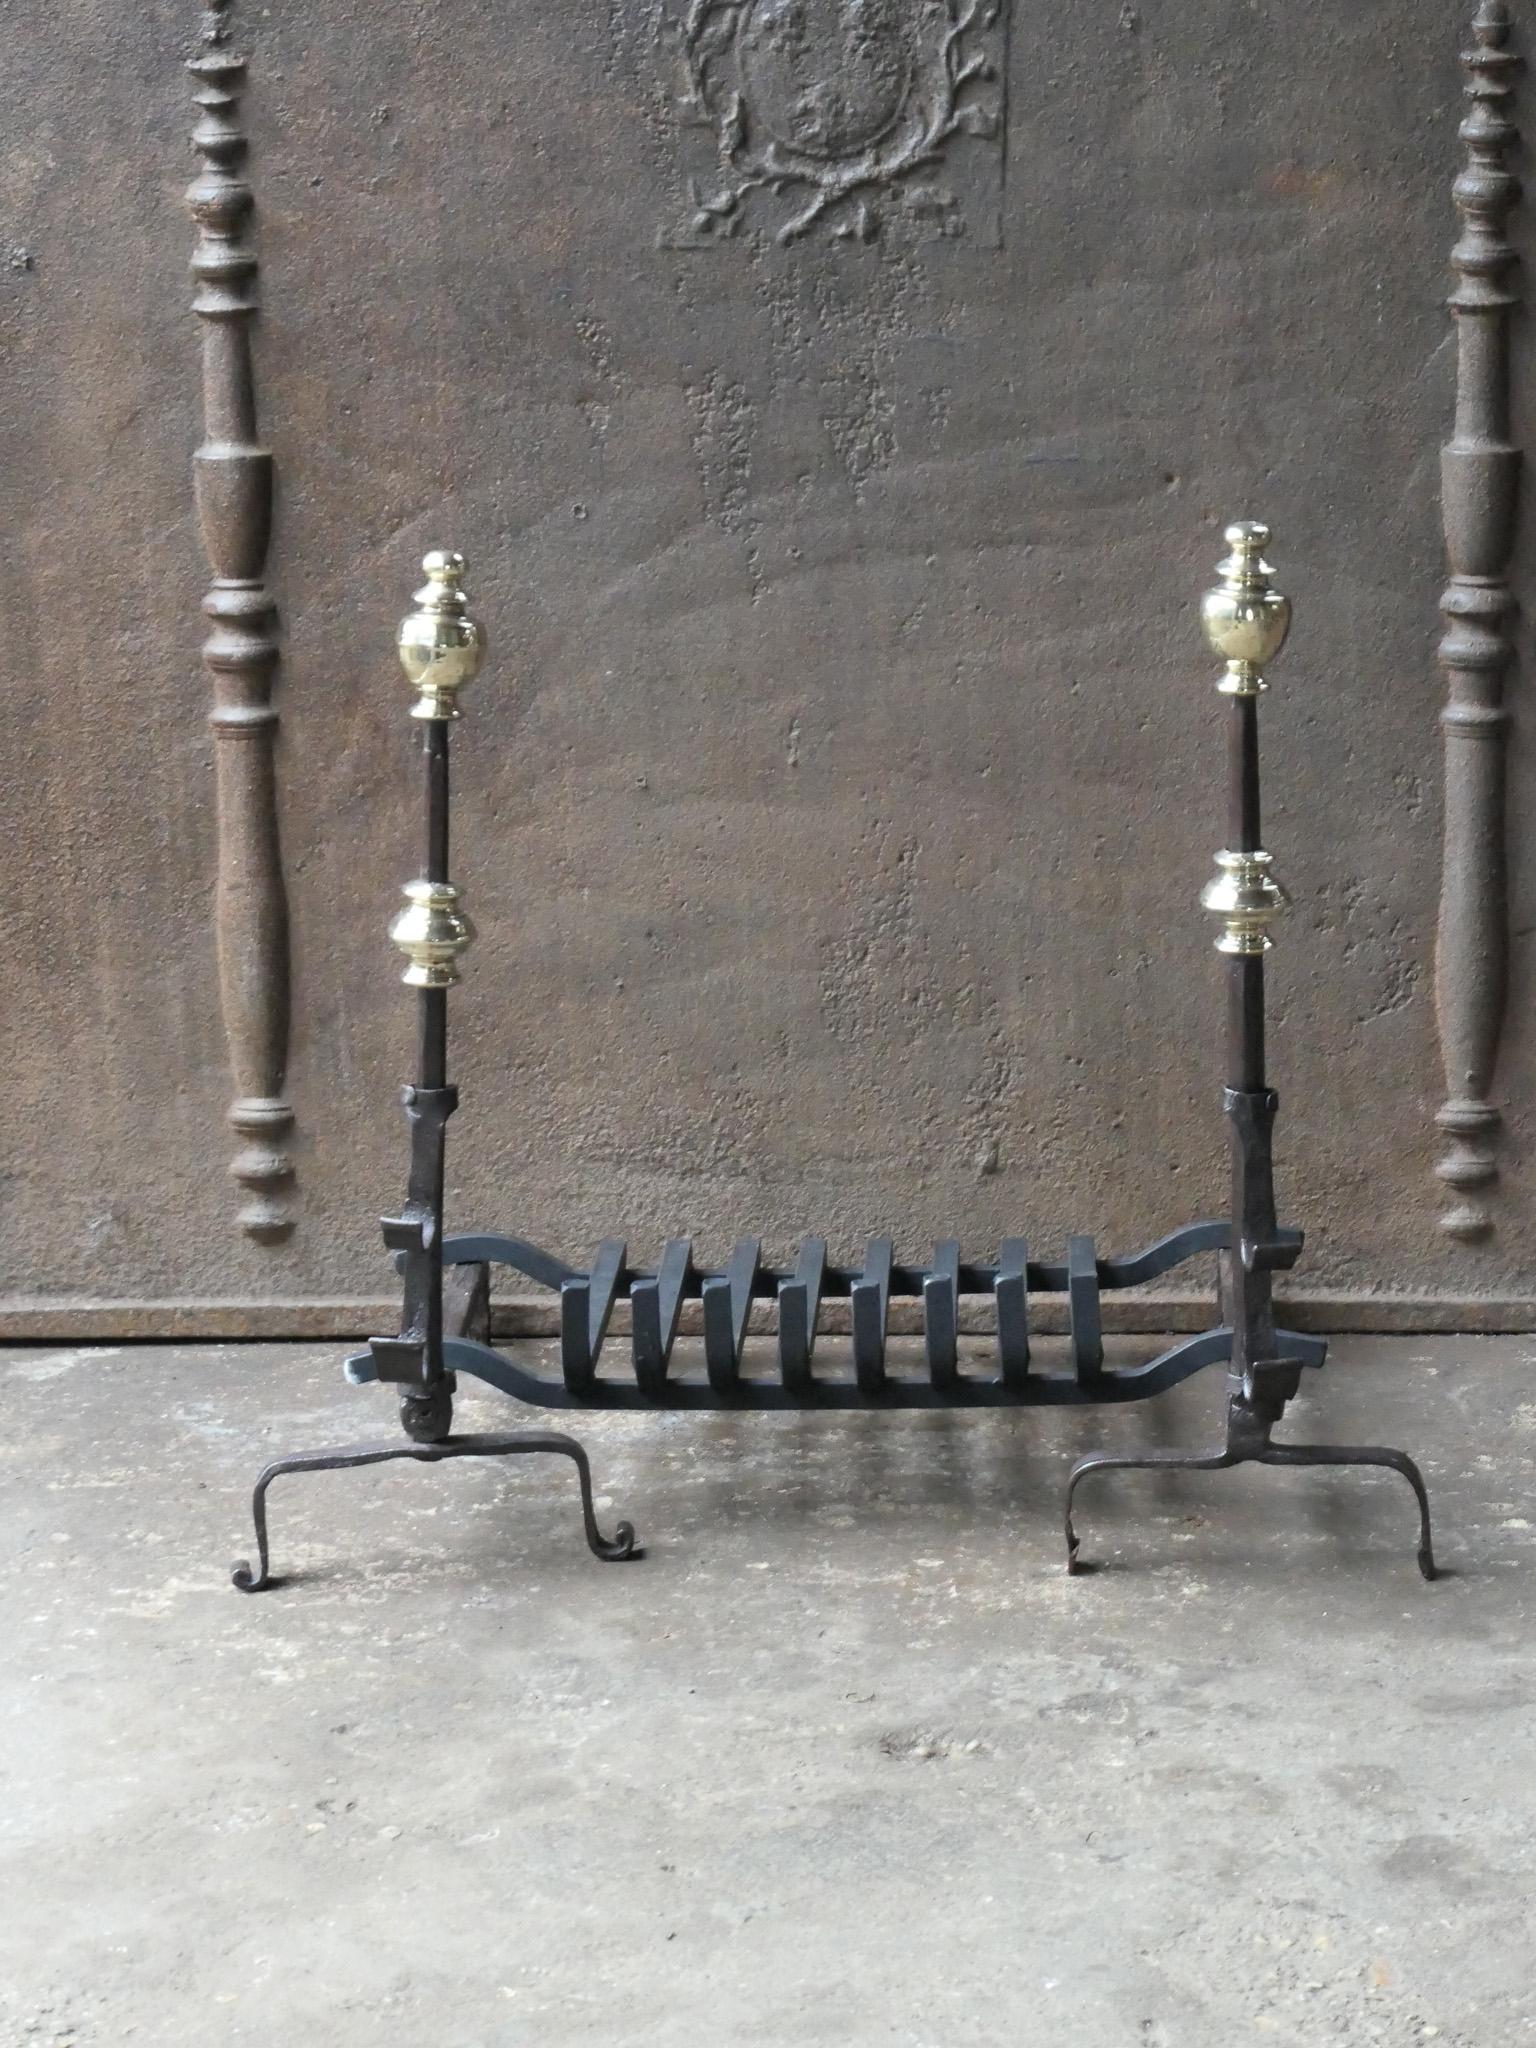 Beautiful French 17th century fireplace basket or fire grate from the Louis XIV period. The fireplace grate is made of wrought iron and bronze. The condition is good. The total width at the front is 27.0 inch (68.5 cm).



















 